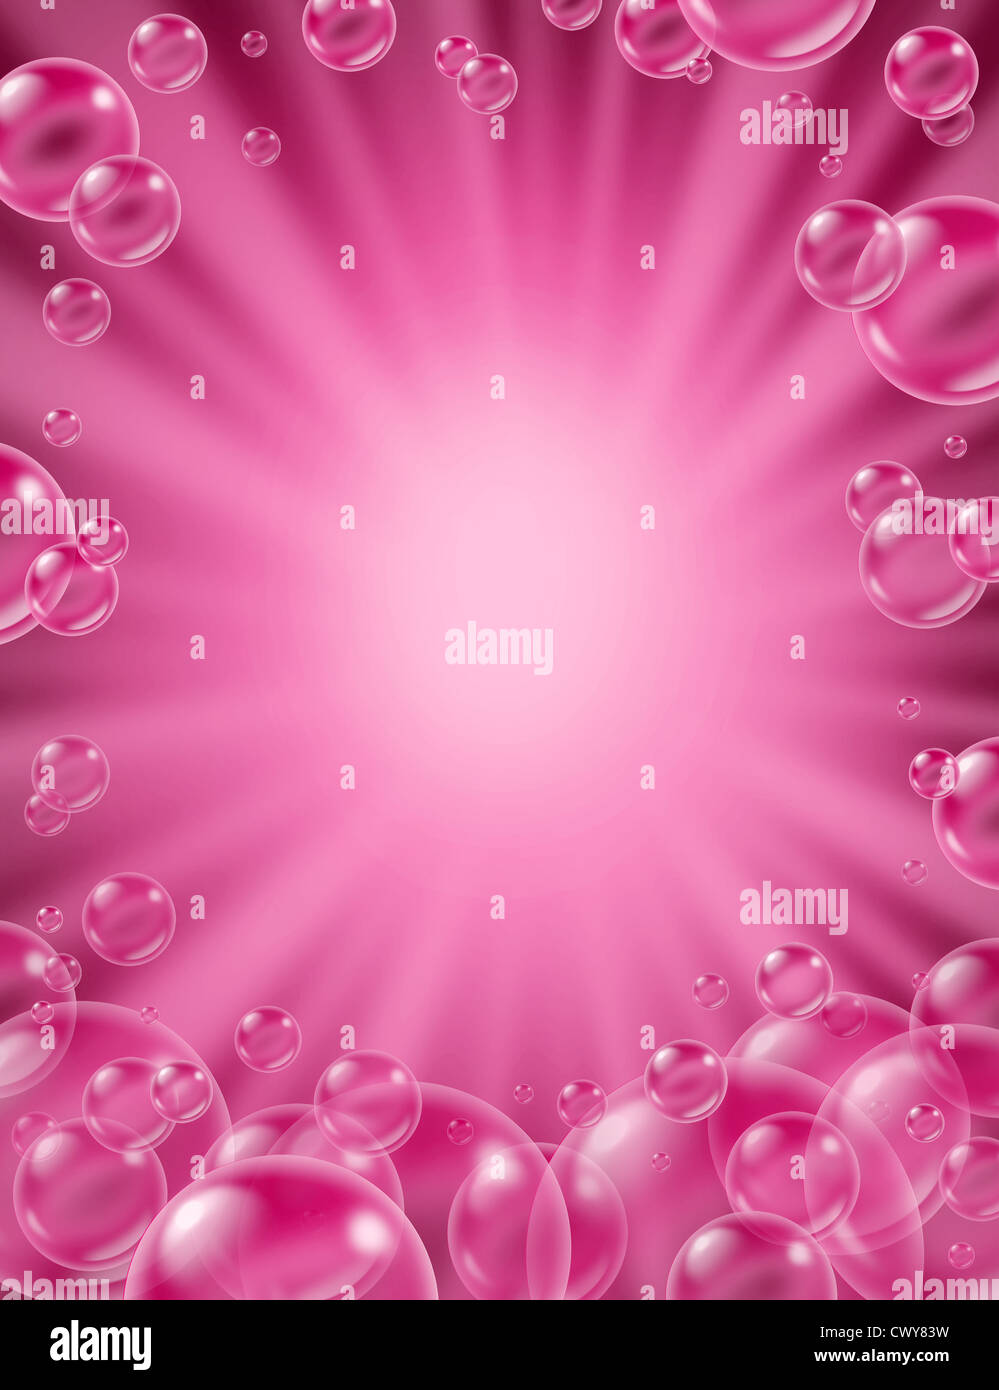 Pink bubbles background with a star burst frame and transparent bath soap suds bubbling with blank area for text with pretty delicate foam in many sizes as clean beauty symbols of washing and freshness. Stock Photo